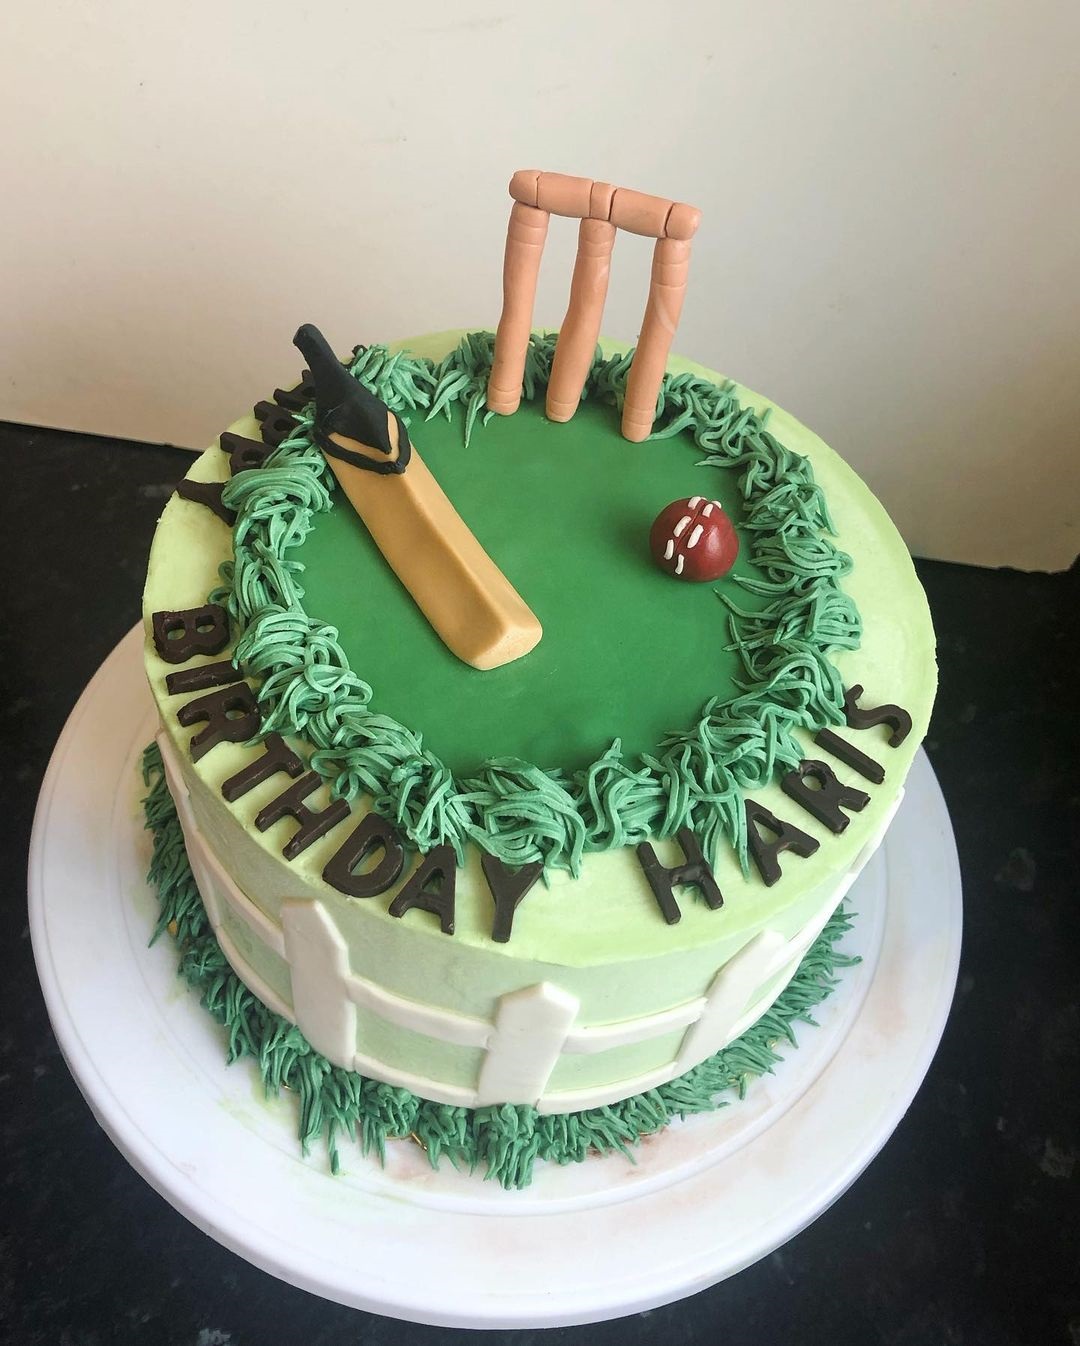 CRICKET PERSONALISED EDIBLE ICING BIRTHDAY CAKE TOPPER AND 8 BAT BALL  CUPCAKES | eBay